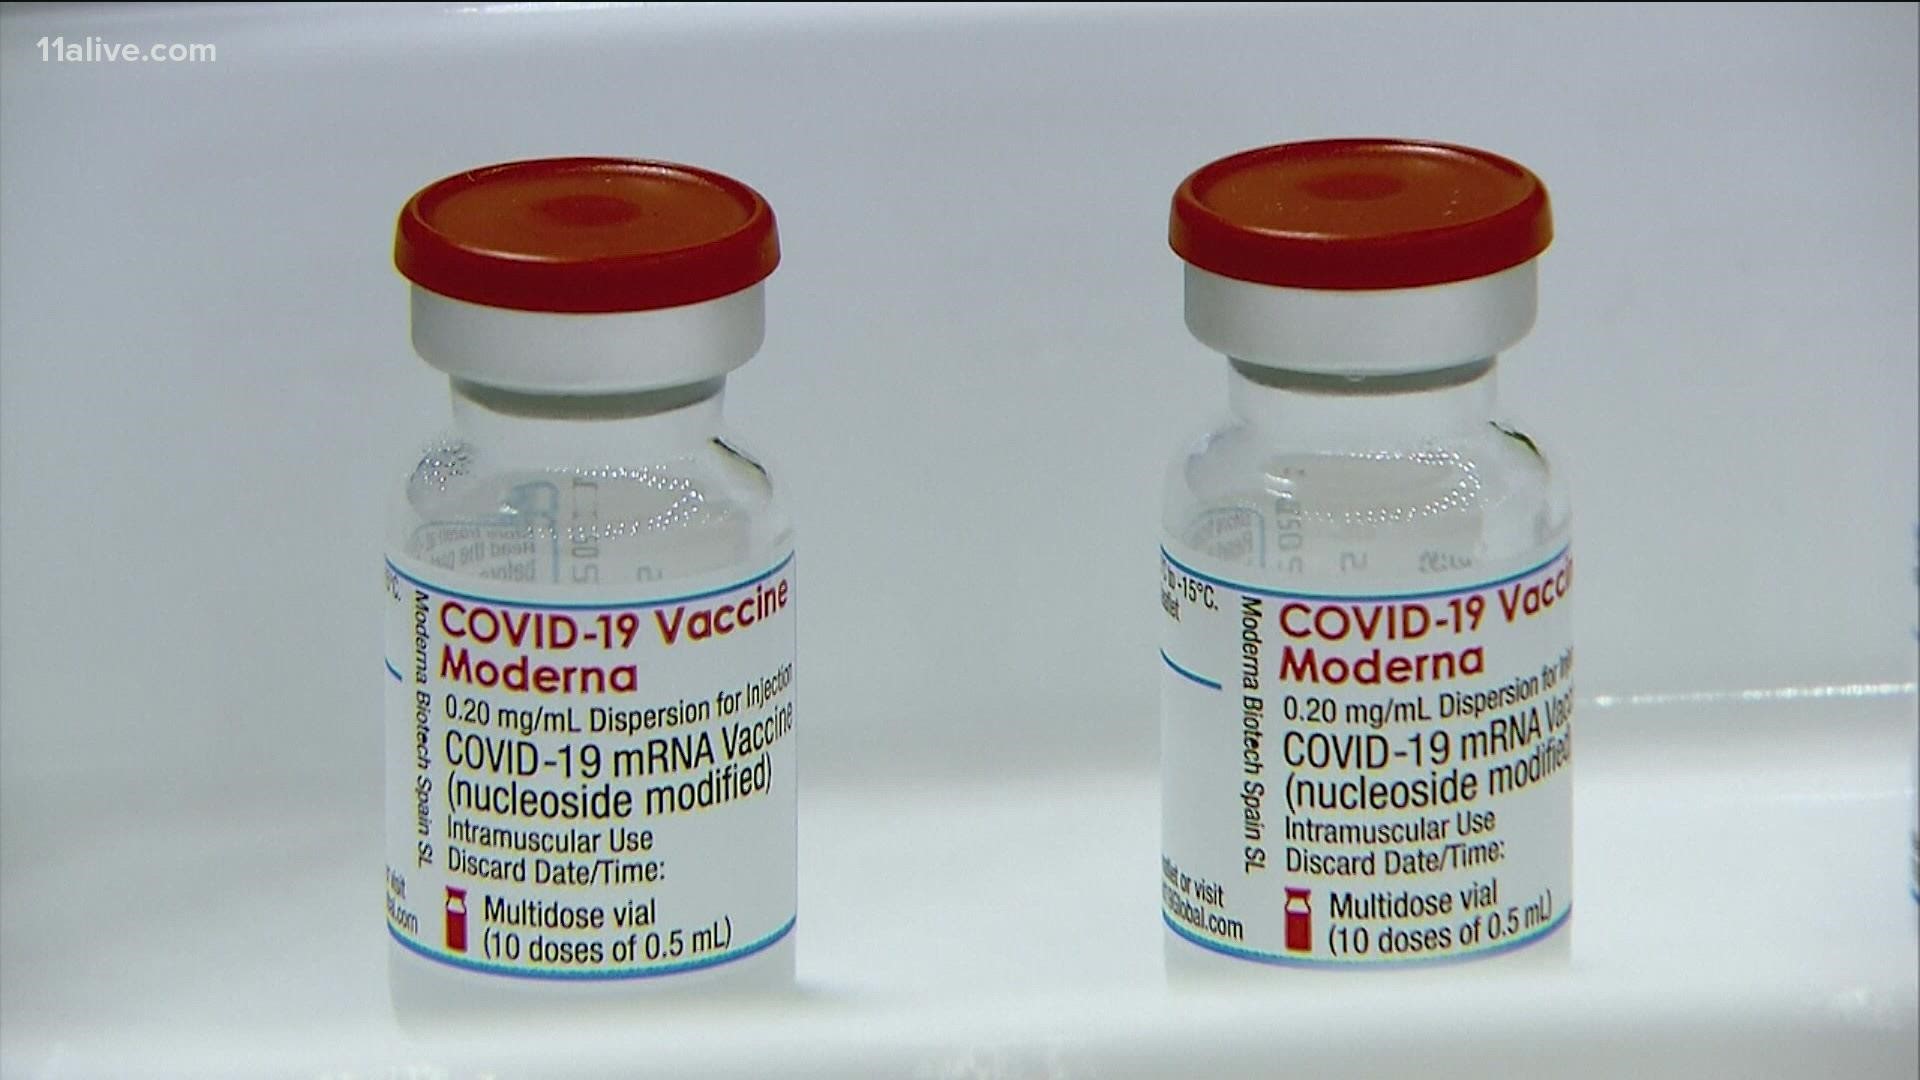 Within the last hour, a CDC advisory panel approved Moderna and J&J's COVID booster shots.